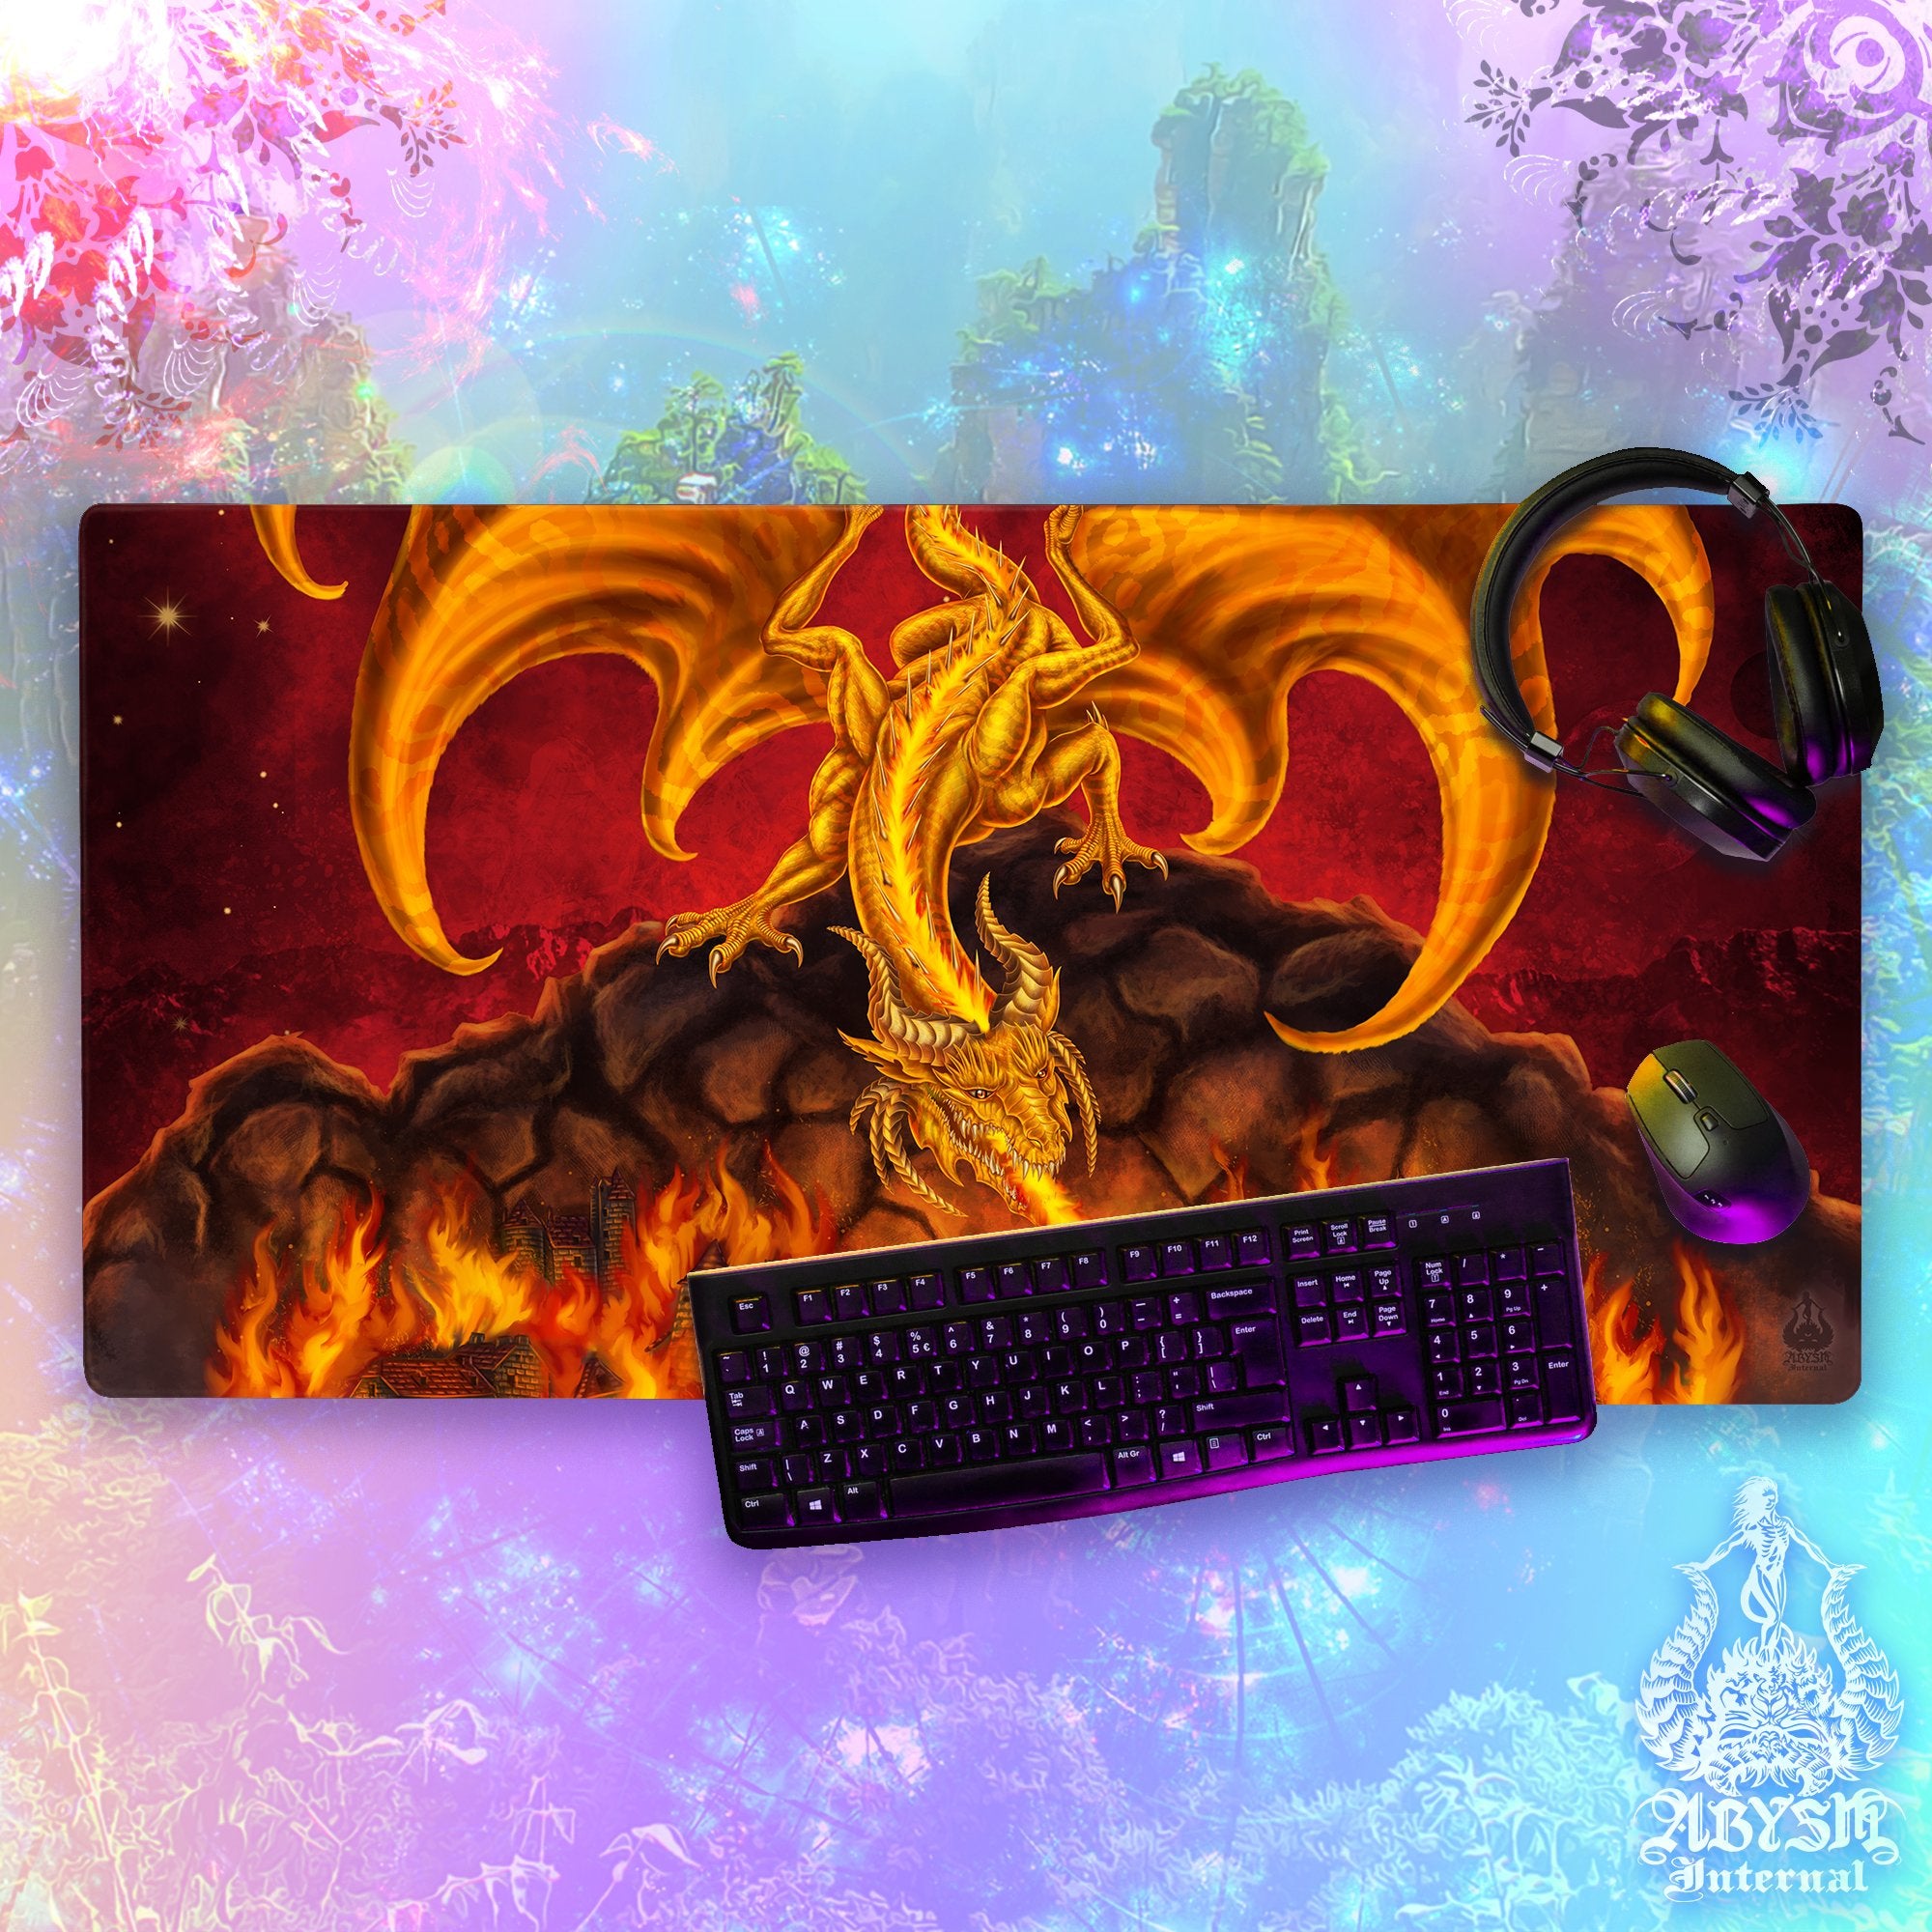 Gold Dragon Workpad, Fantasy Art Gaming Mouse Pad, Game Desk Mat, Table Protector Cover, RPG, DM Gift Print - Fire - Abysm Internal